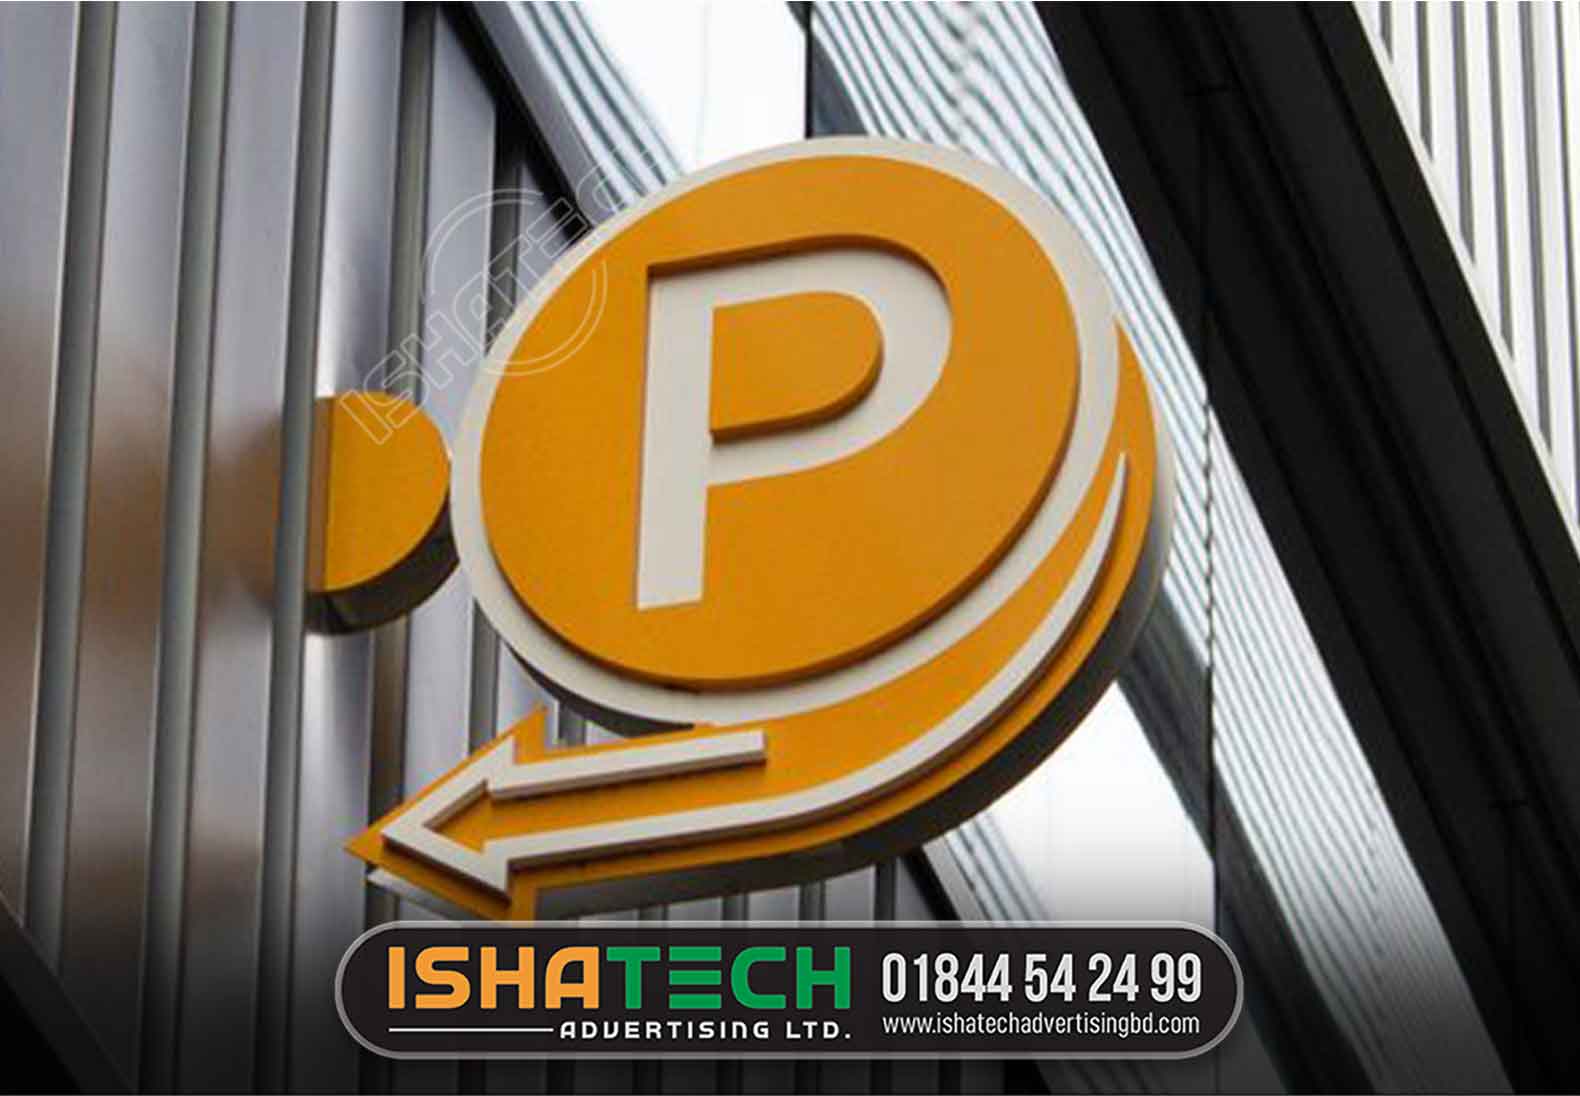 P BELL SIGN, ACRYLIC LIGHTING BELL SIGNBOARD MAKING BY ISHATECH ADVERTISING LTD